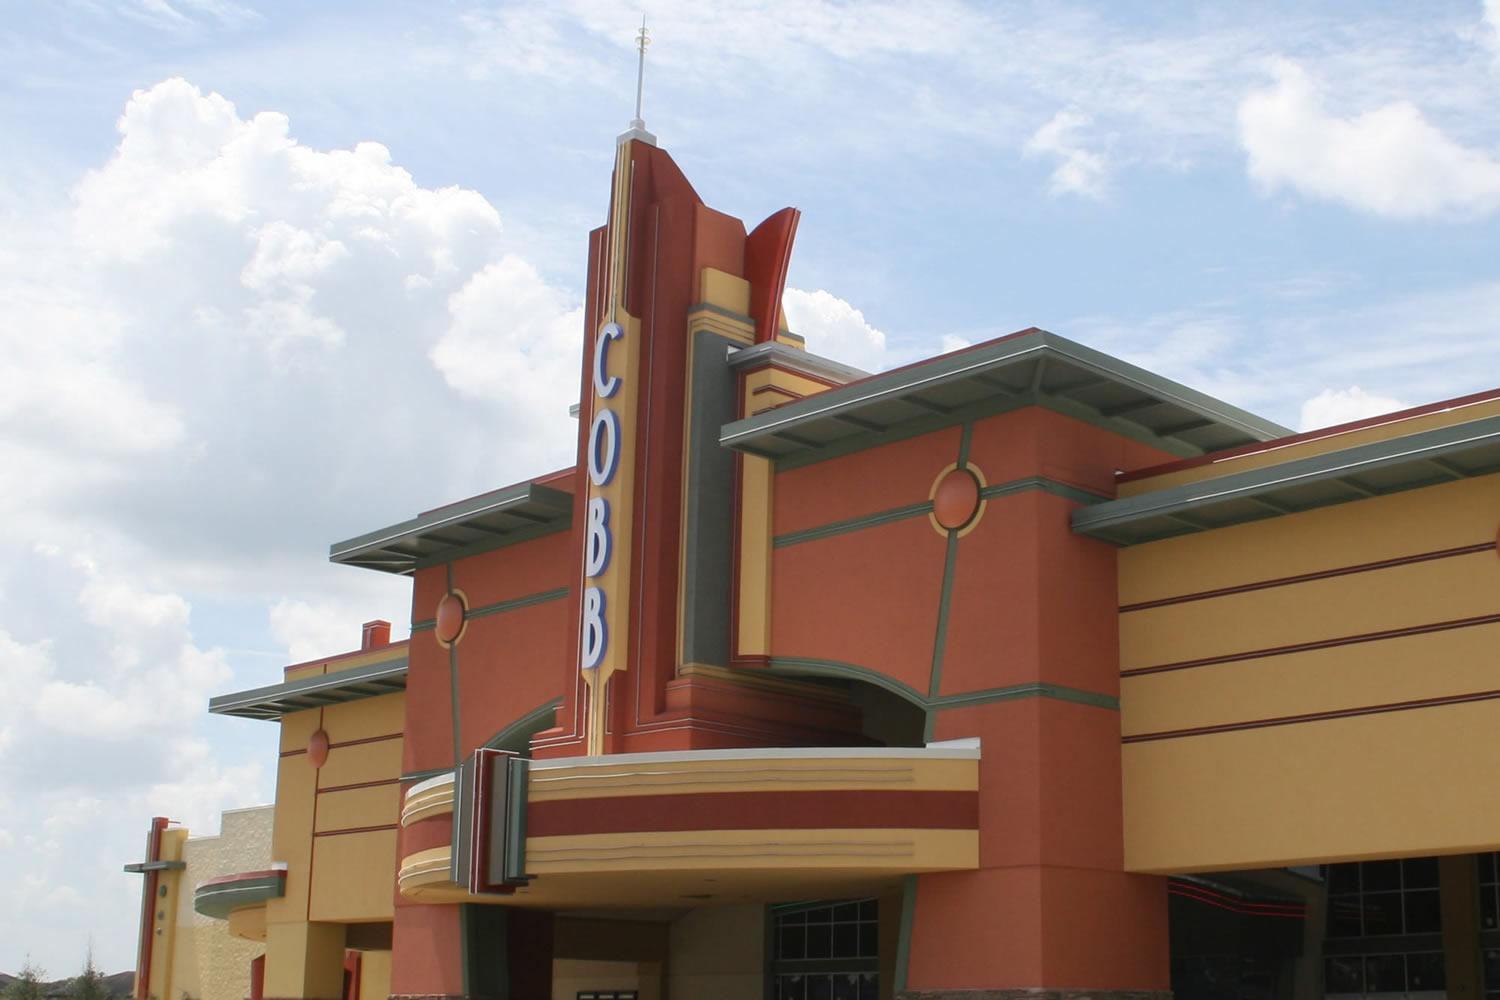 florida man shot movie theater wouldnt stop texting grove 16 shooting